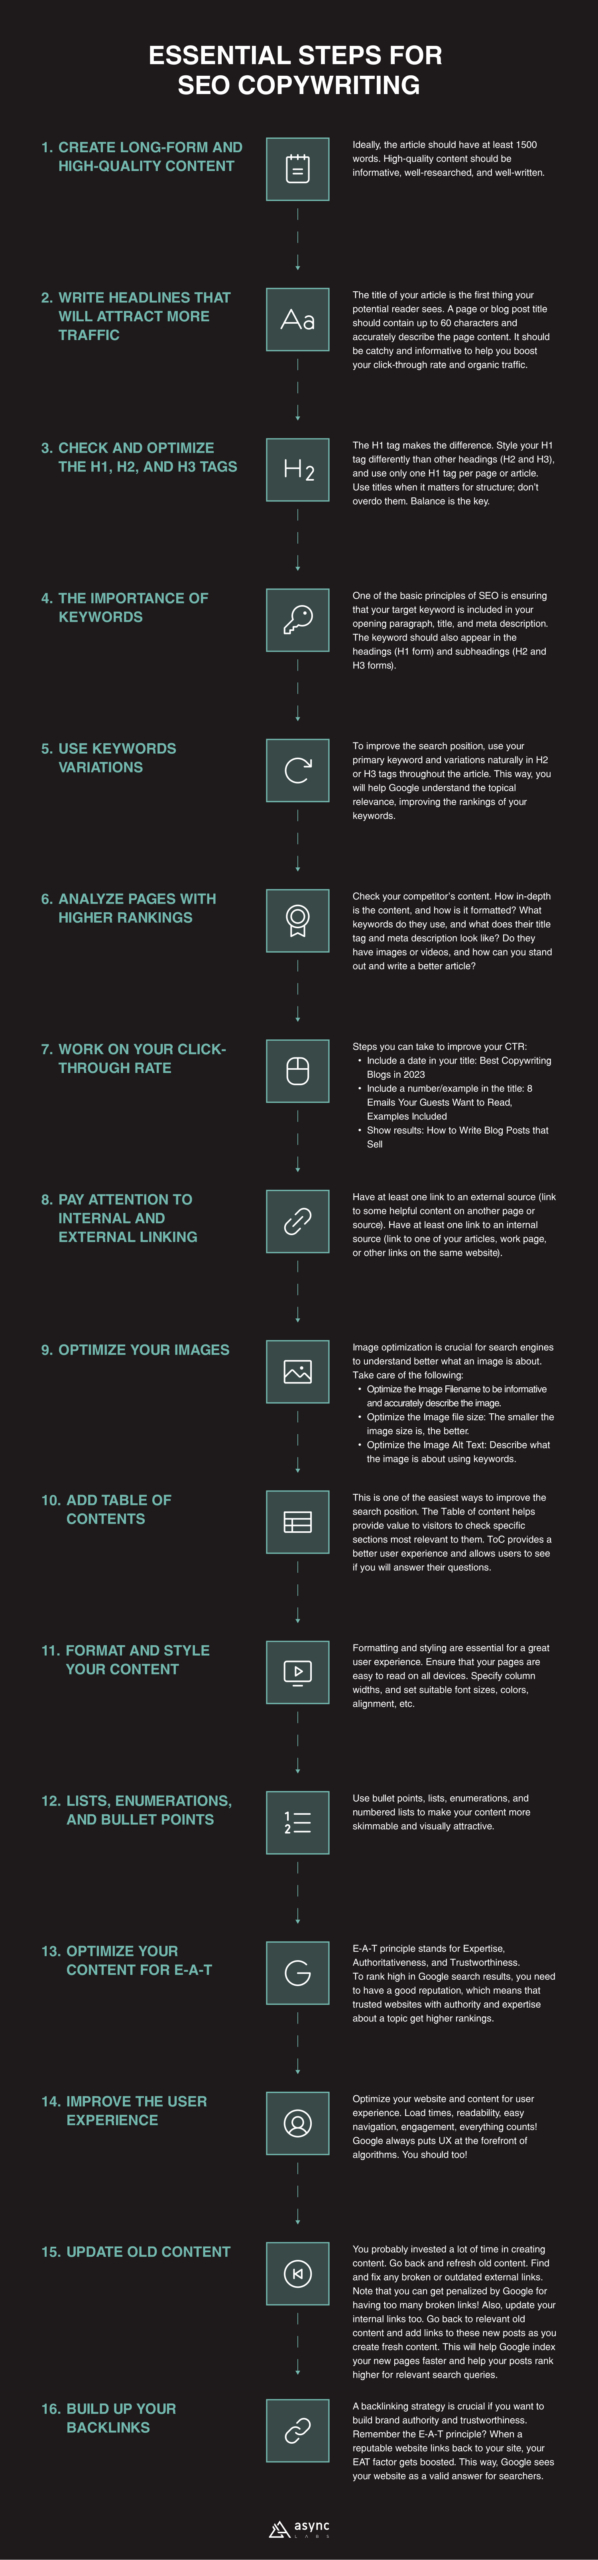 infographic with tips for seo copywriting services